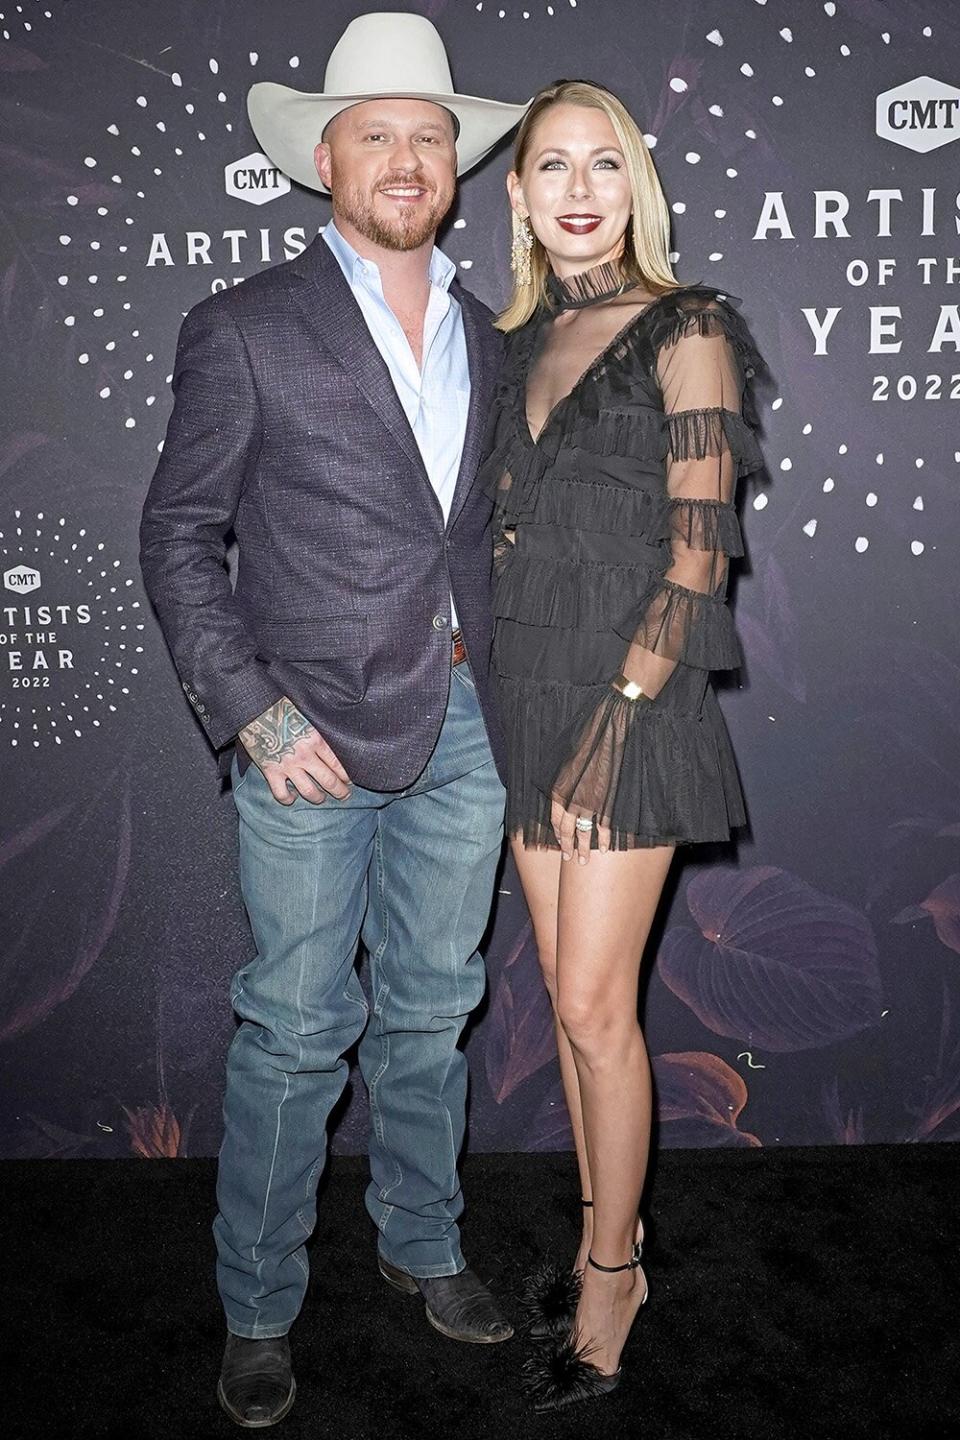 NASHVILLE, TENNESSEE - OCTOBER 12: Cody Johnson and Brandi Johnson attend the 2022 CMT Artists Of The Year at Schermerhorn Symphony Center on October 12, 2022 in Nashville, Tennessee. (Photo by Mickey Bernal/WireImage)